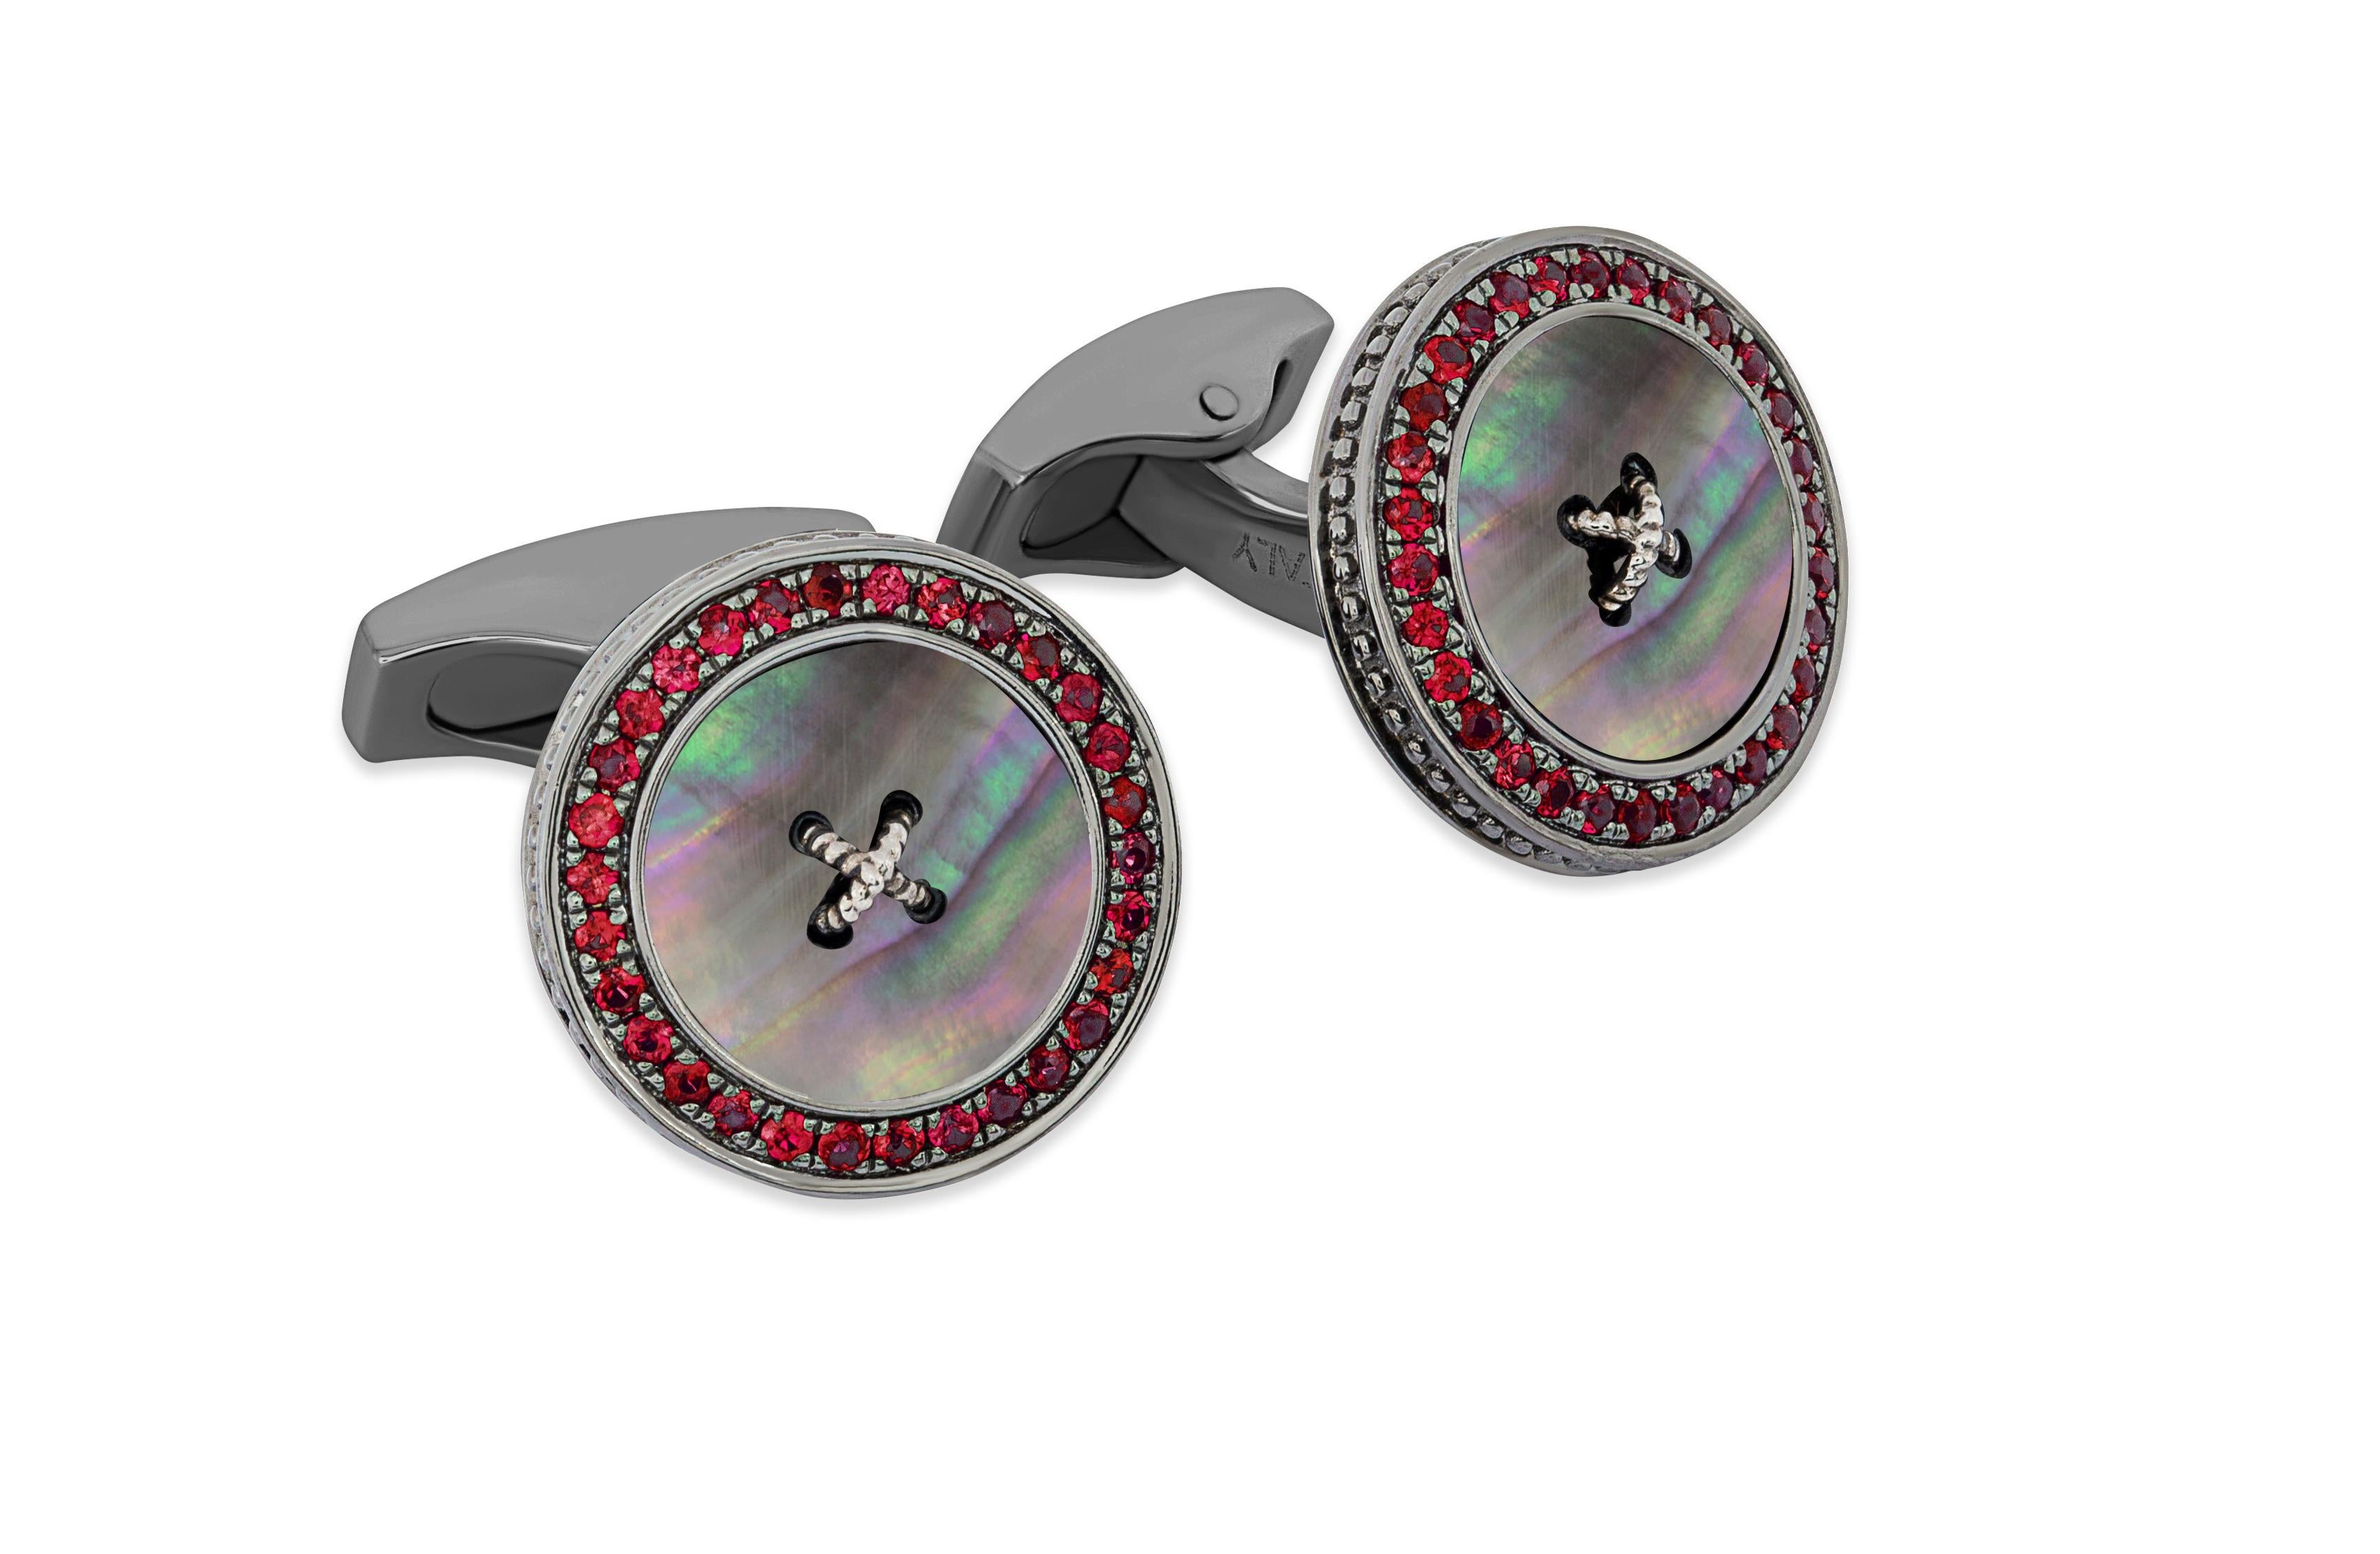 Precious Button Cufflinks with Black Mother of Pearl & Rubies

A luxurious reinvention of the classic tailoring button. This button is meticulously crafted from three materials, silver, semi-precious stone and precious rubies or sapphires. The